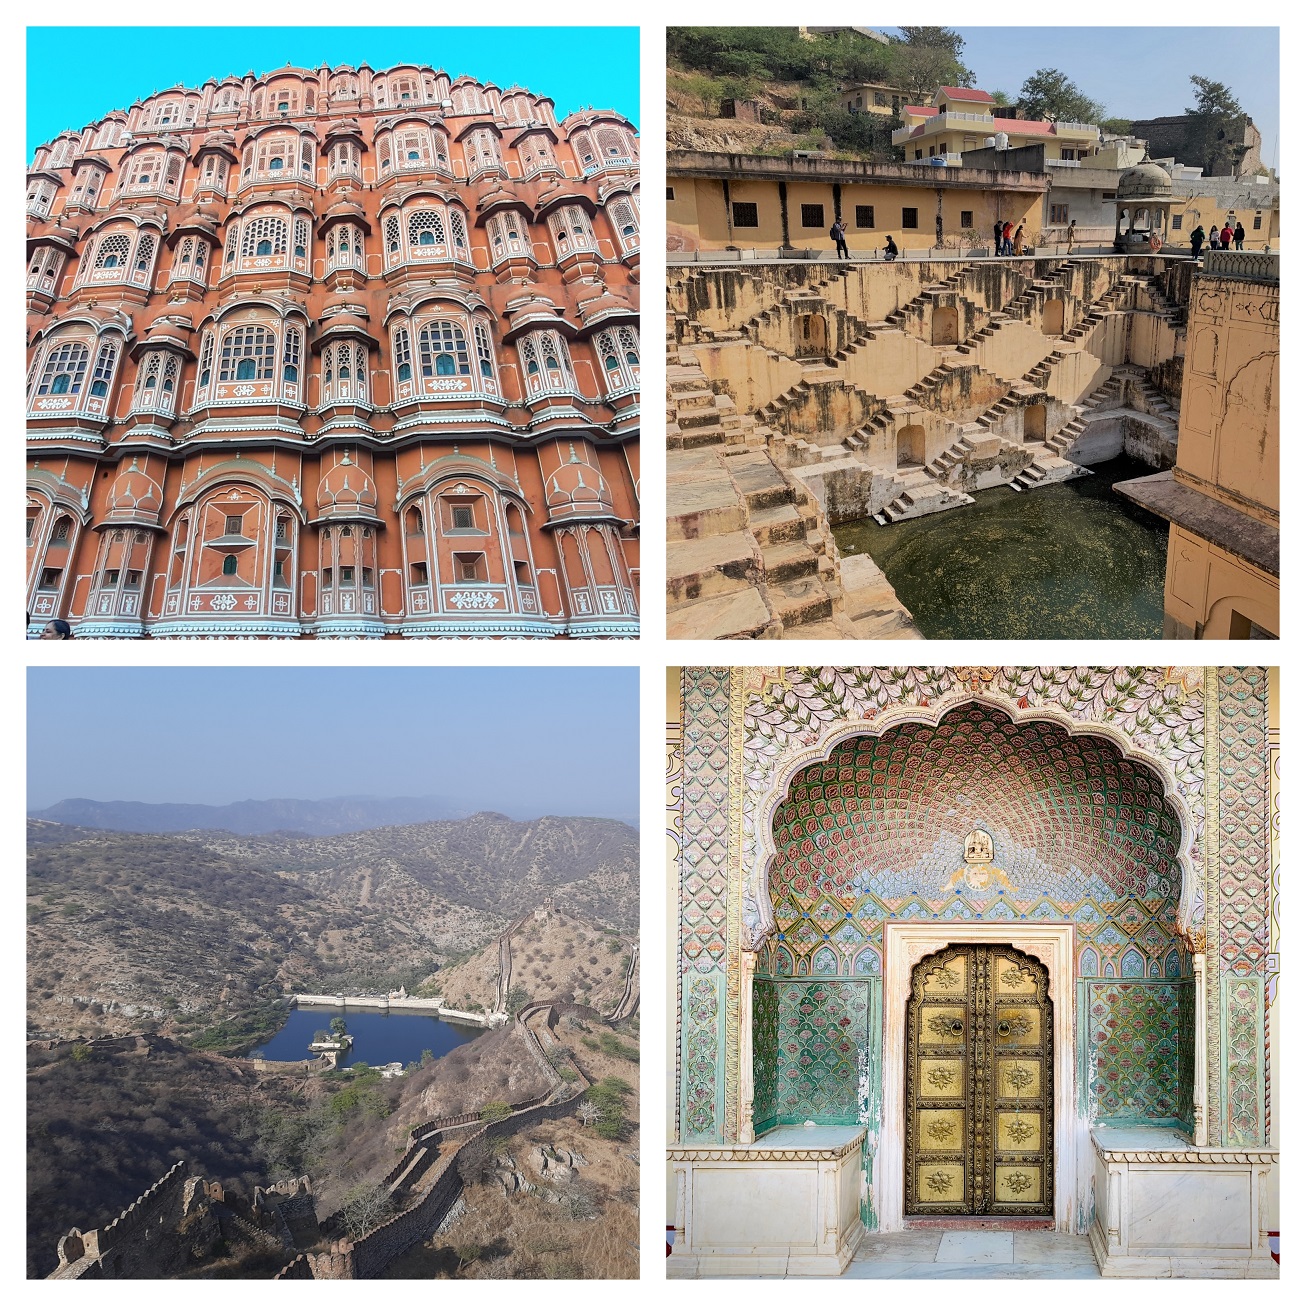 Best places to visit in Jaipur in 2 days | Jaipur Tour and siteseeing